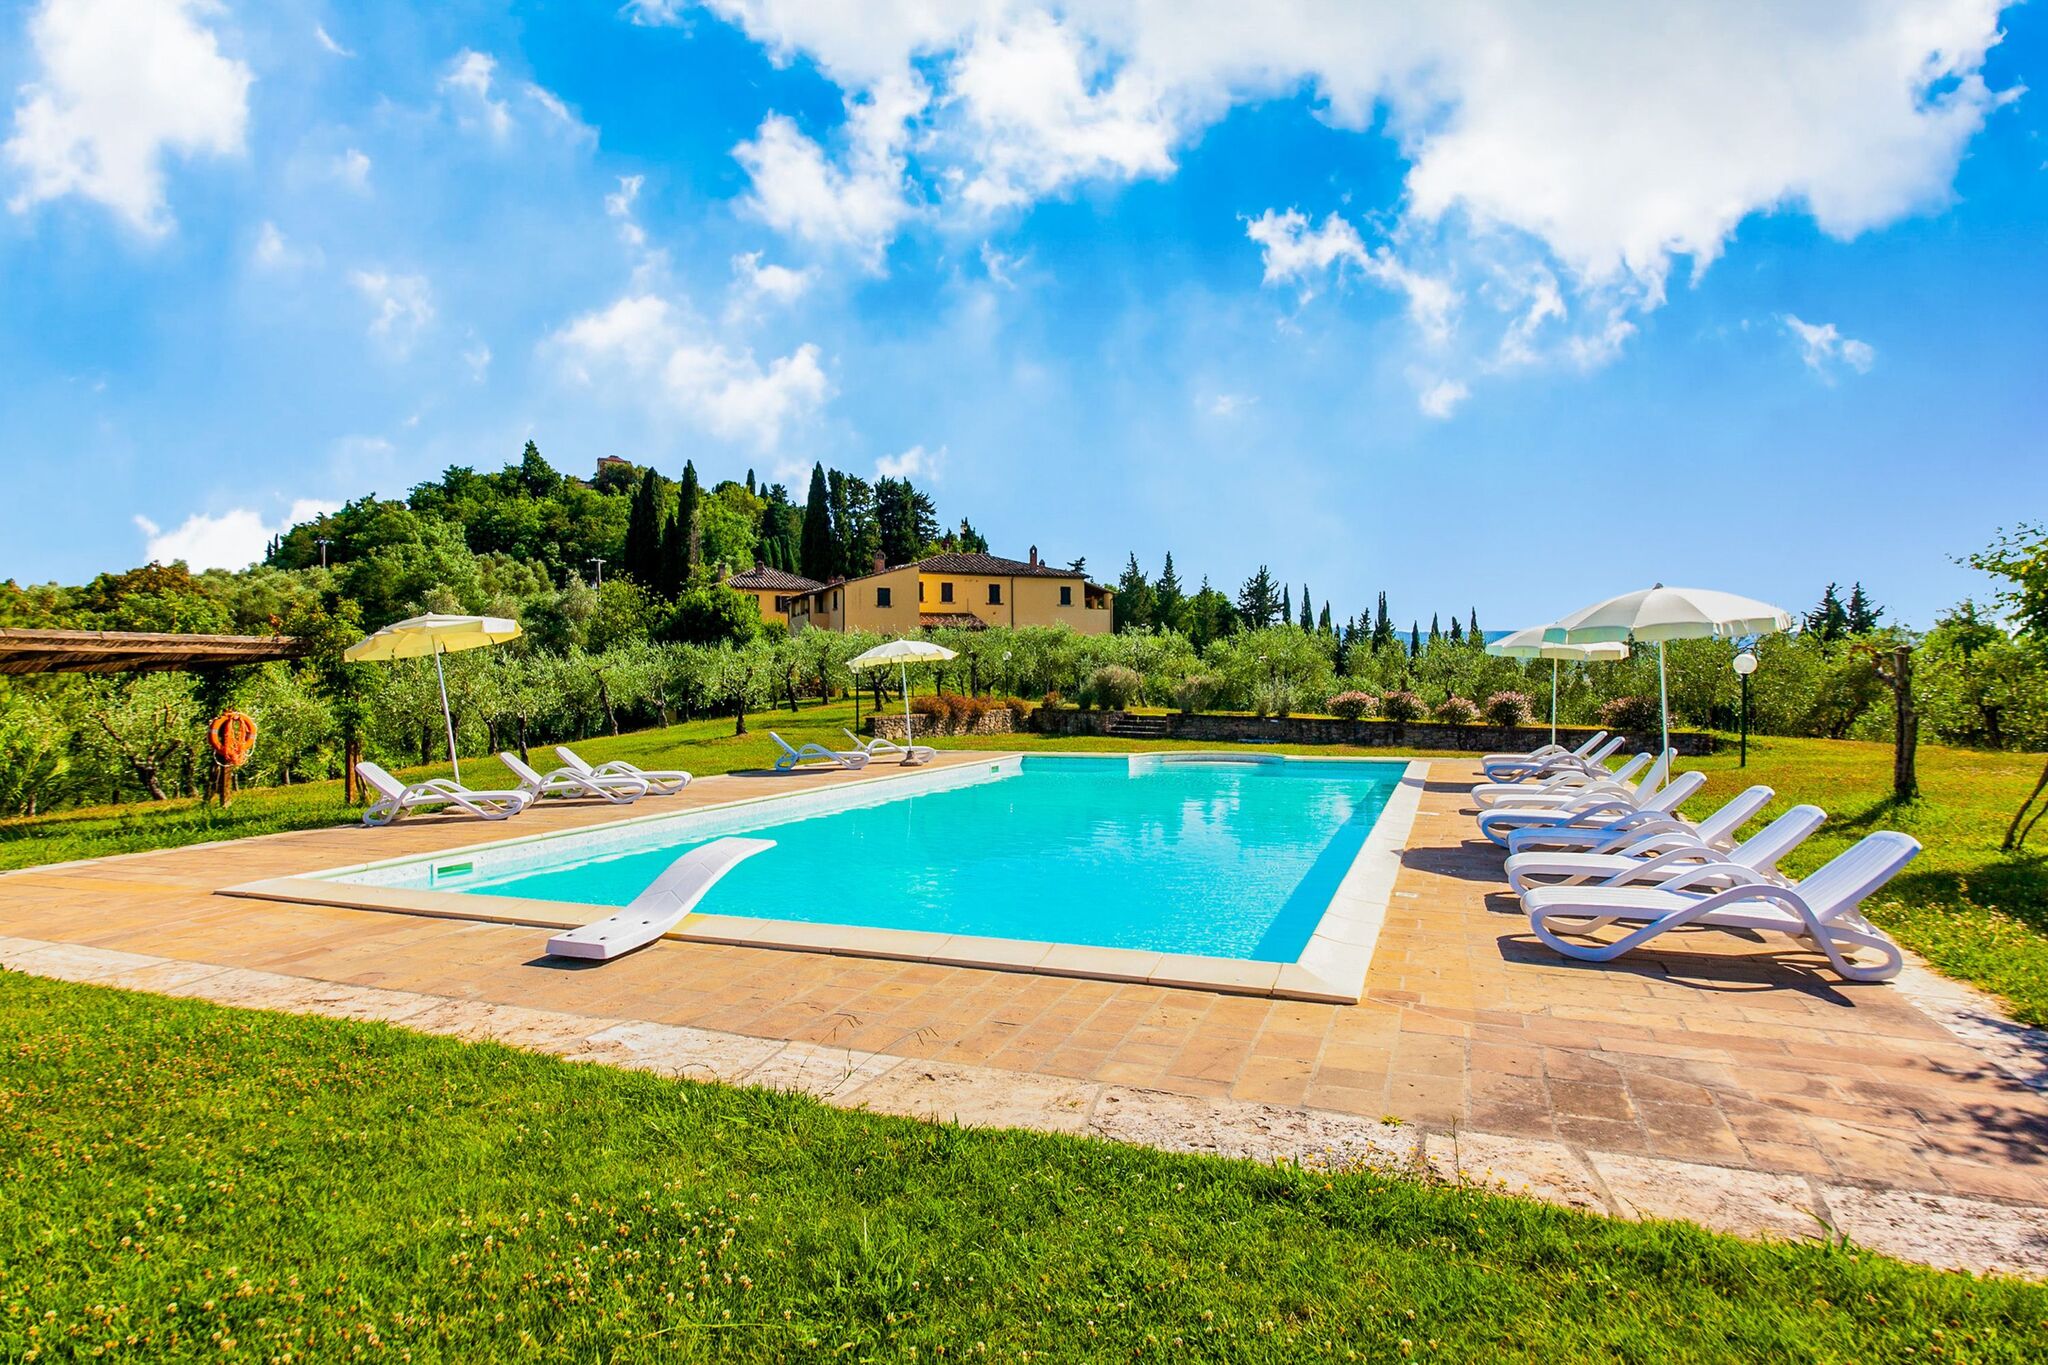 small village of beautiful apartments in the green Tuscan hills and olive groves